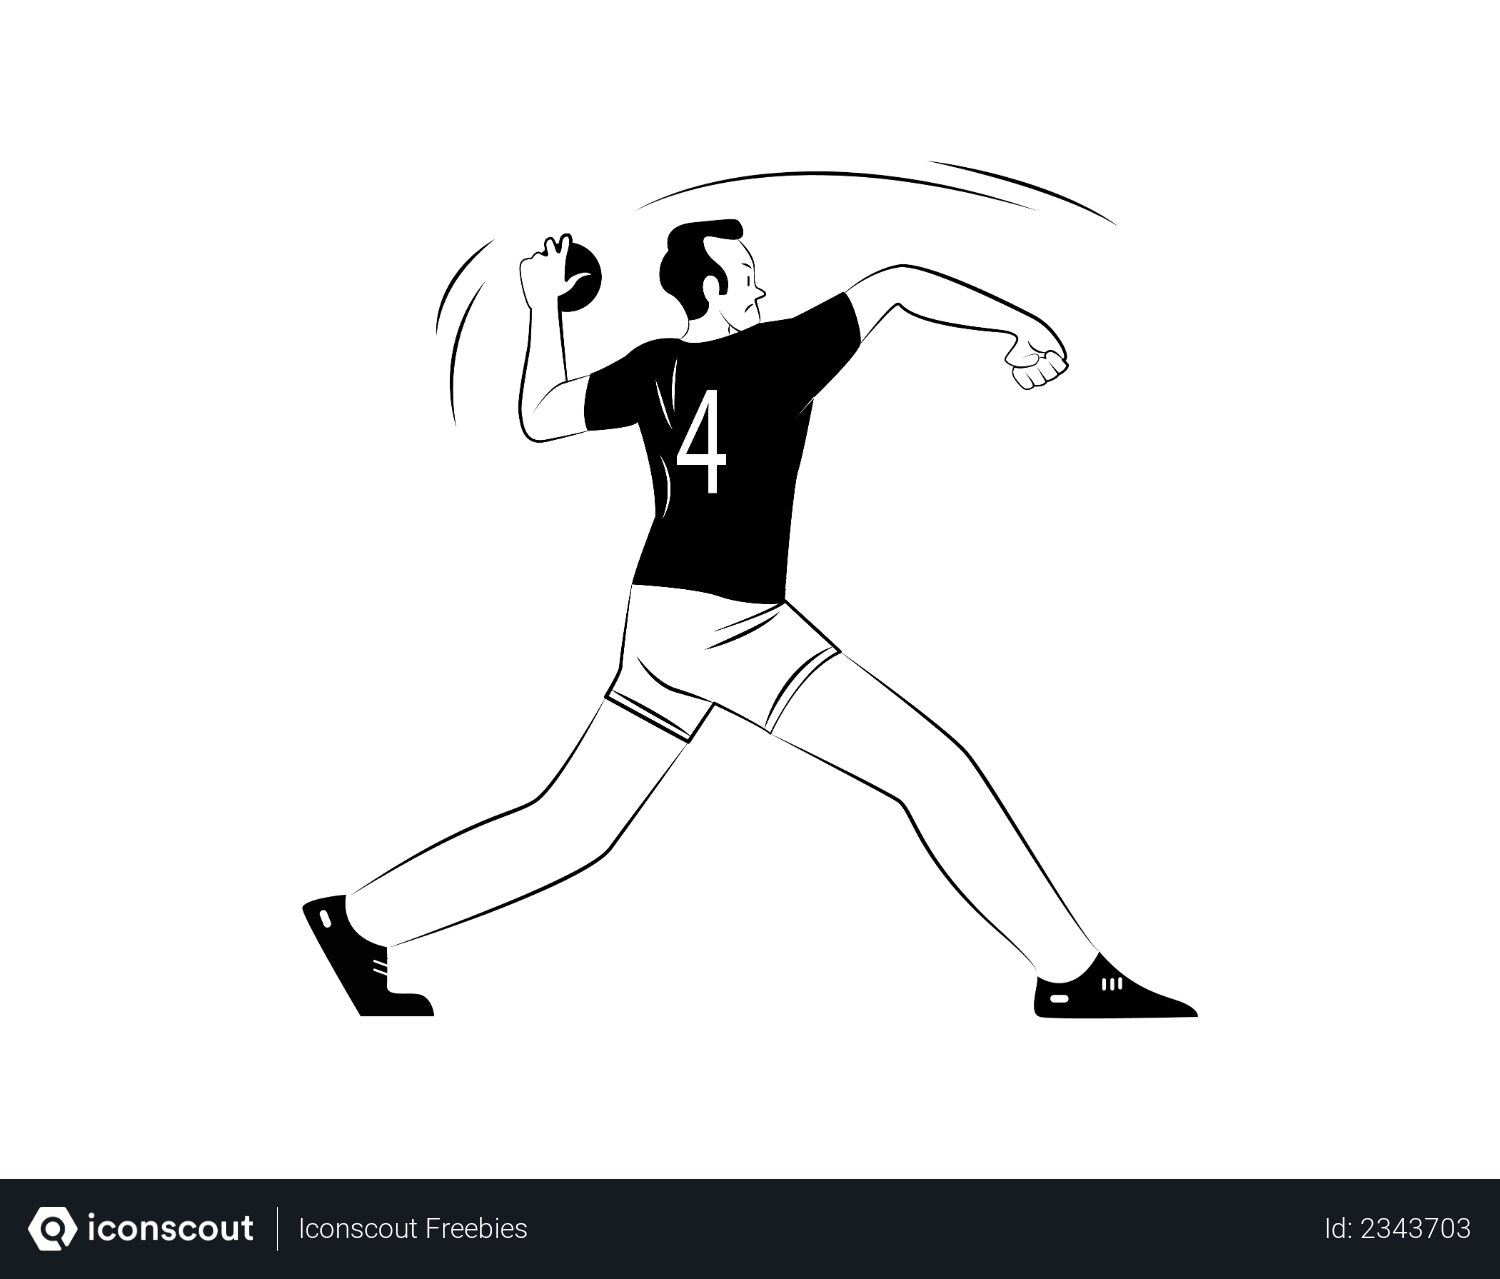 Free Male player throwing ball Illustration download in PNG & Vector format